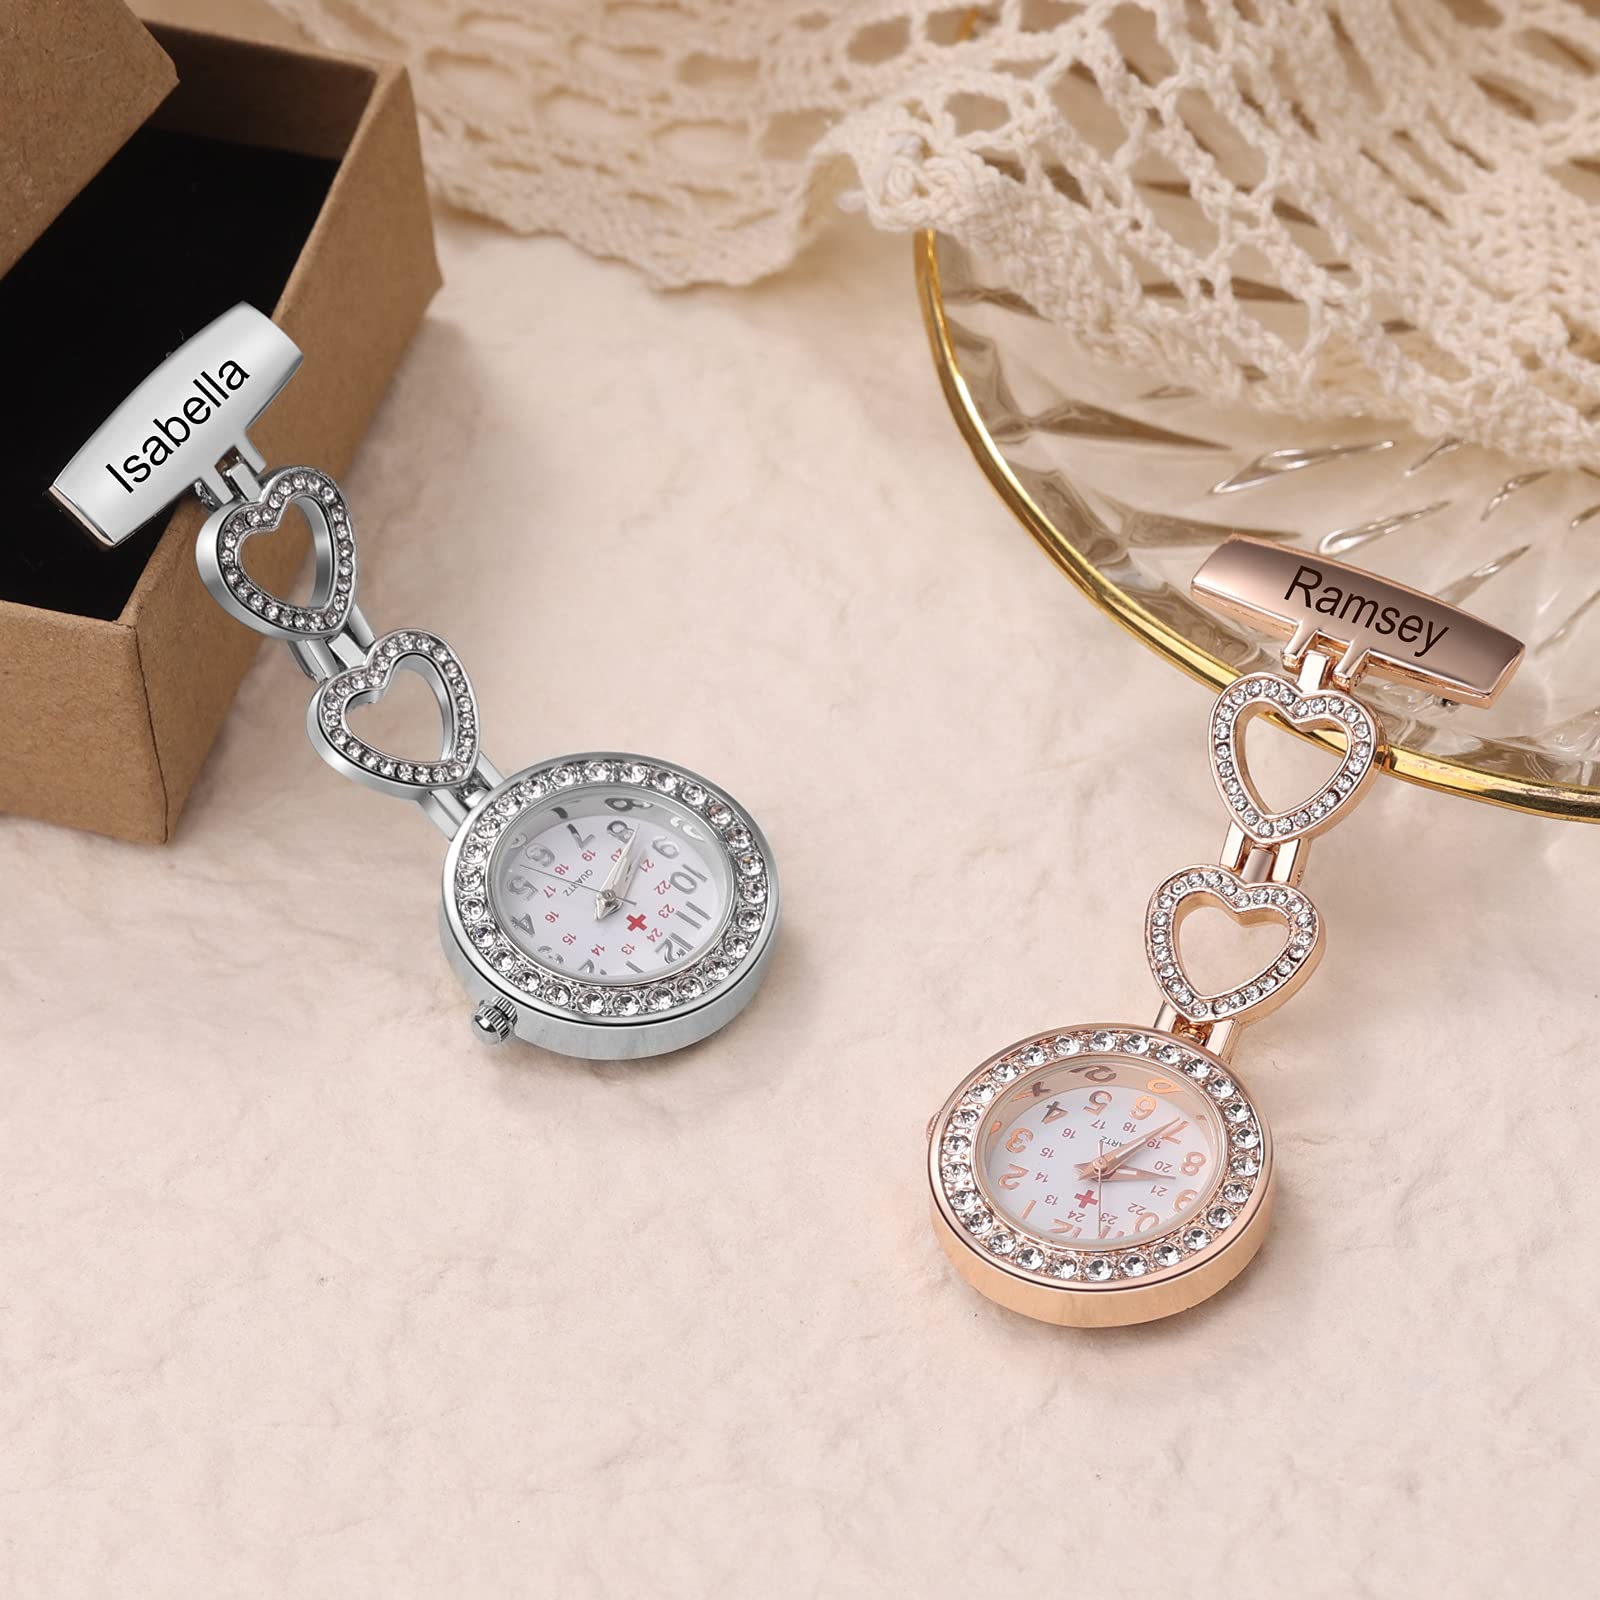 Nurse Watches for Nurses Doctors, Custom Nurse Watches Hanging Engraved Name Lapel Pin Watch on Nursing Watch, Personalized Nurses Pocket Watches for Graduation Birthday Valentine's Day Mothers Day